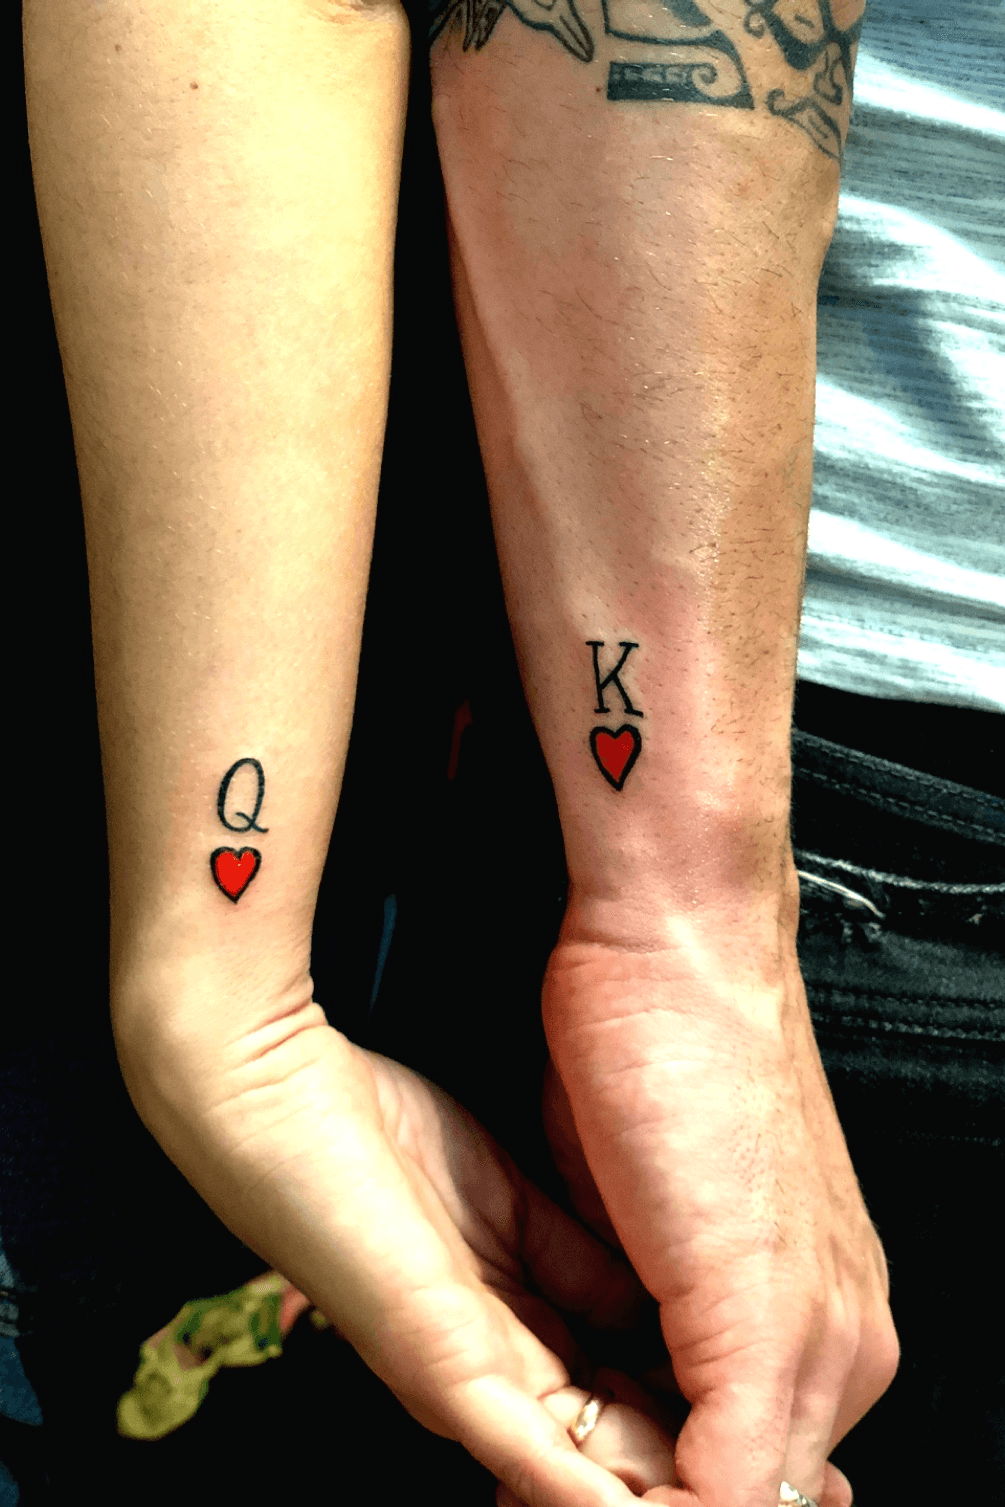 Tattoo uploaded by stefano triolo  KQ king and Queen king queen  heart love  Tattoodo